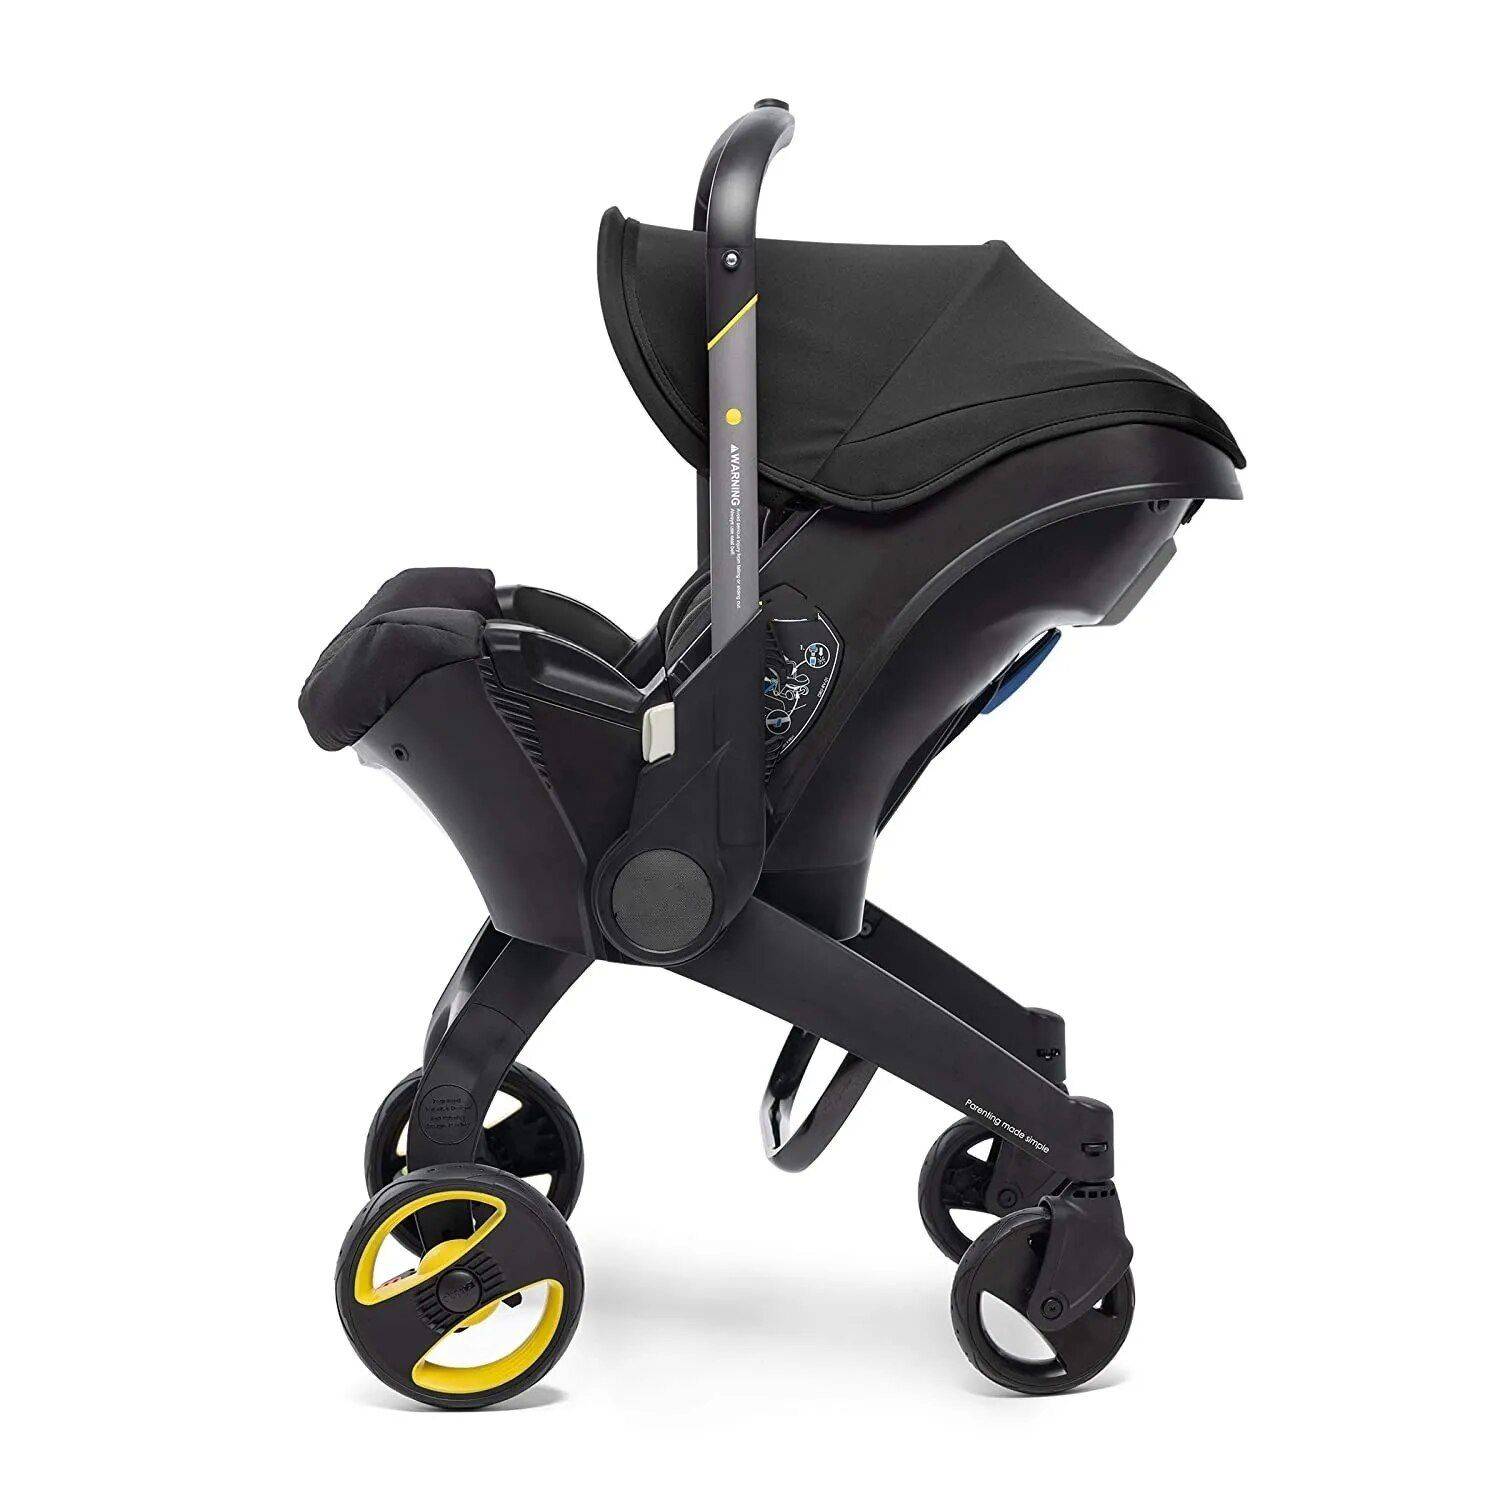 Luxe 3-in-1 High Landscape Baby Stroller with Car Seat Integration Baby Strollers